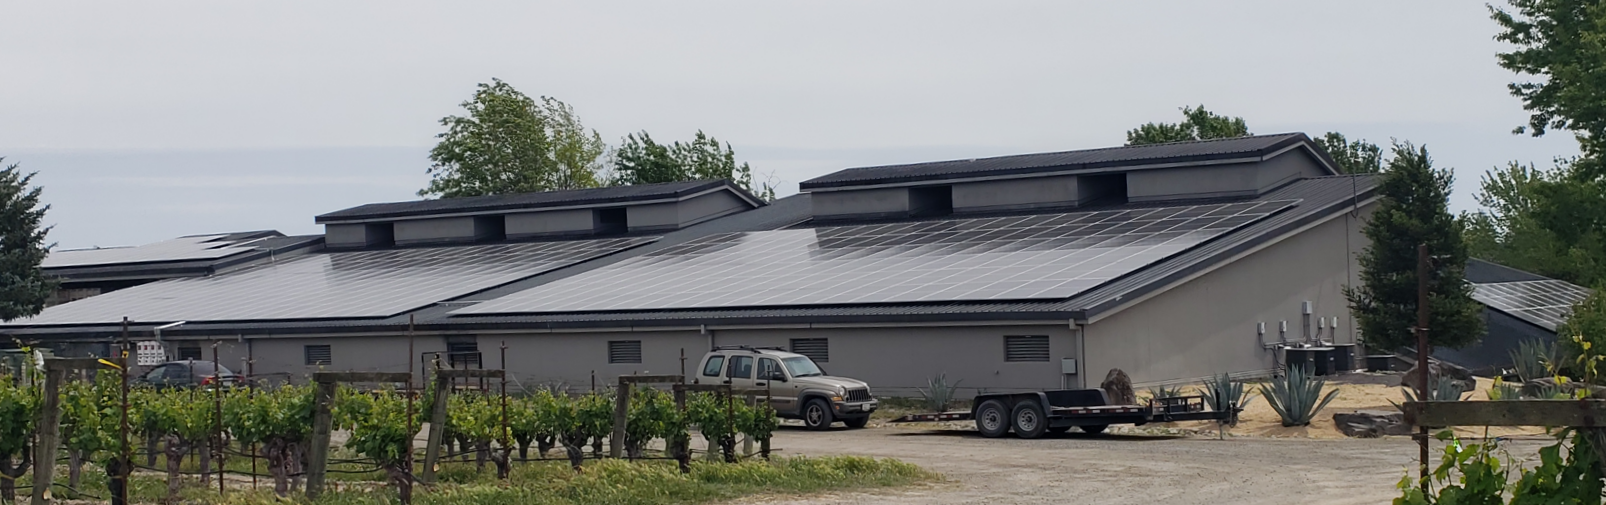 SolarCraft Completes Solar Power Installation for Kistler Vineyards – Sonoma County Winery Captures the Sun and Saves